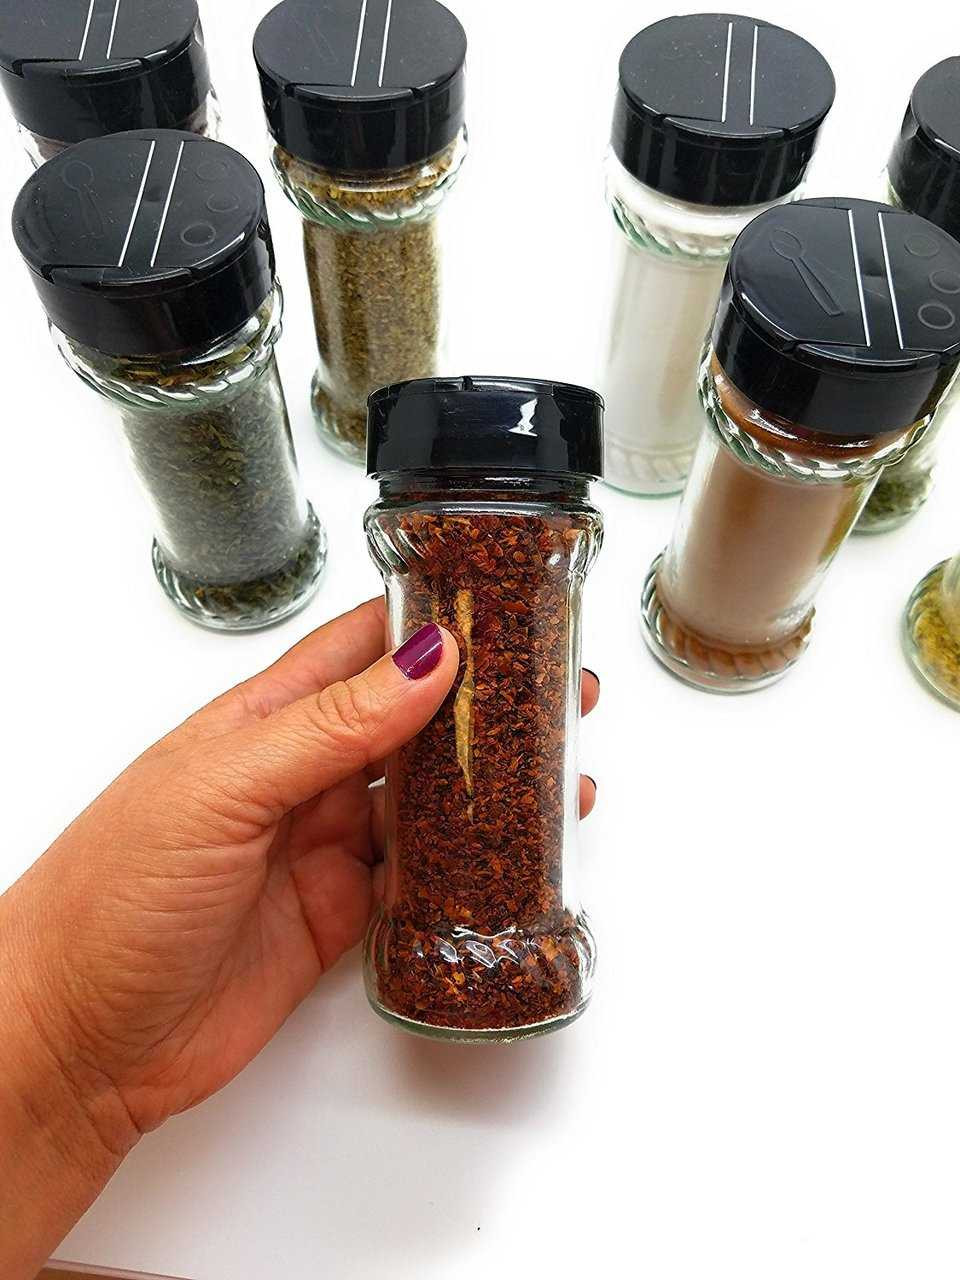 https://cdn11.bigcommerce.com/s-1ybtx/images/stencil/1280x1280/products/1684/7866/64-oz-Glass-Spice-Jar-with-Shaker-Fitment-and-Black-Cap_7014__54954.1696850156.jpg?c=2?imbypass=on